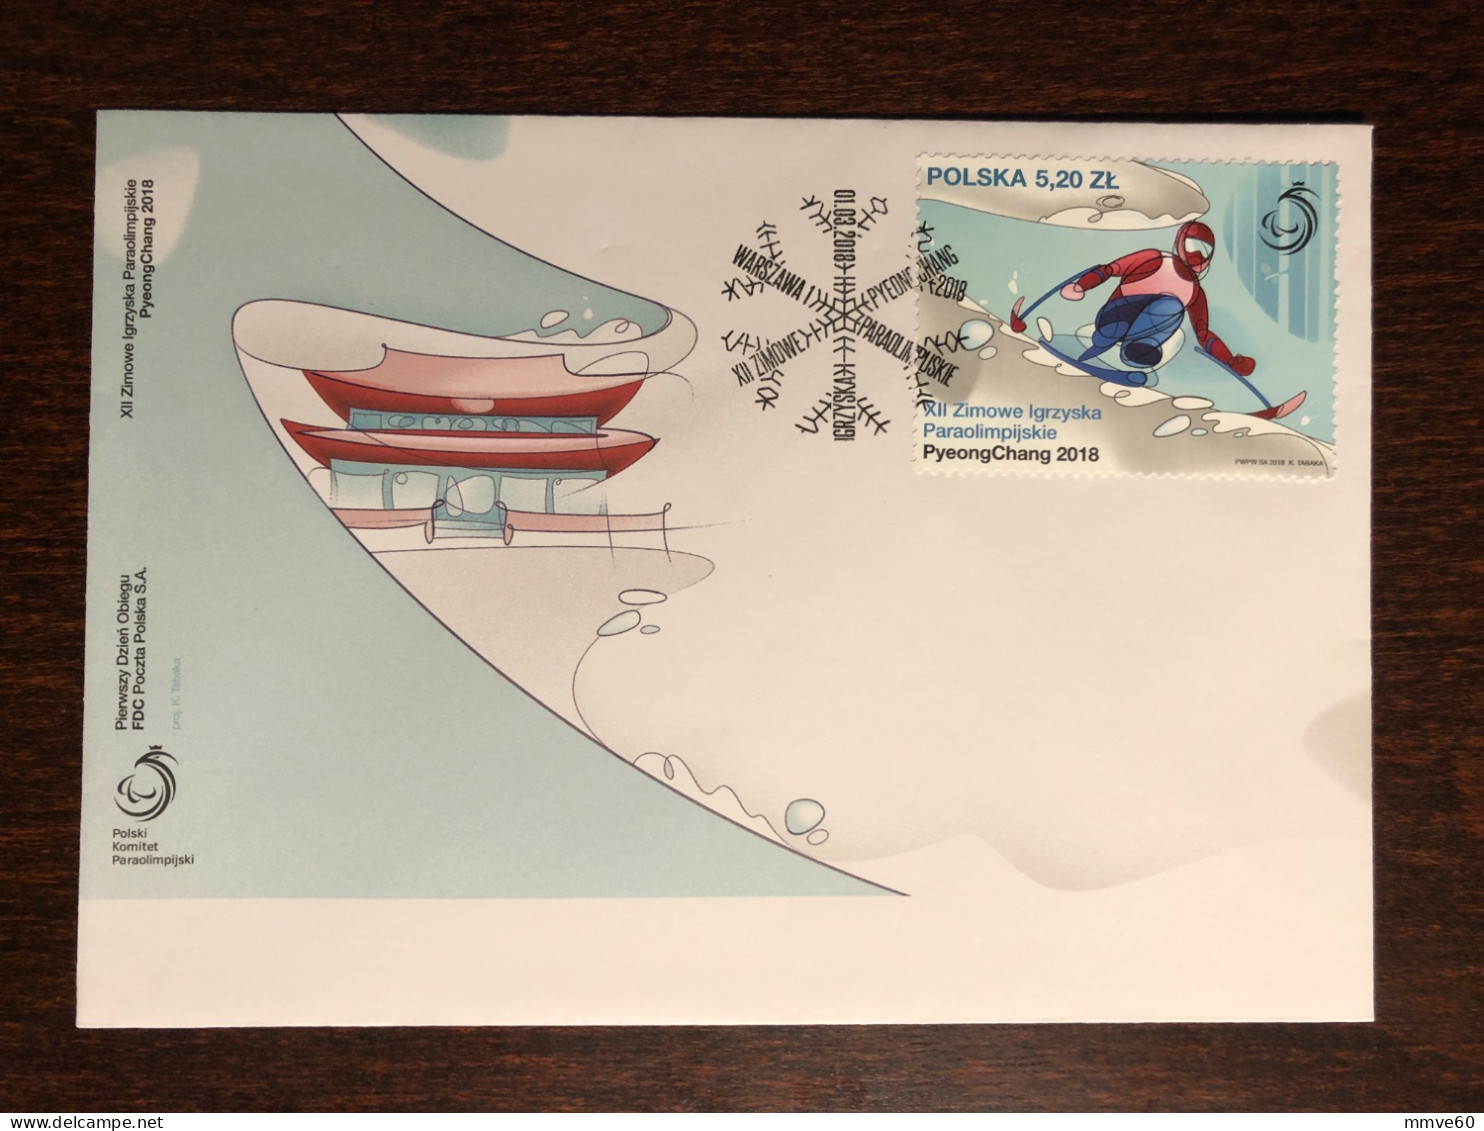 POLAND FDC COVER 2018 YEAR PARALYMPIC DISABLED SPORTS HEALTH MEDICINE STAMPS - FDC